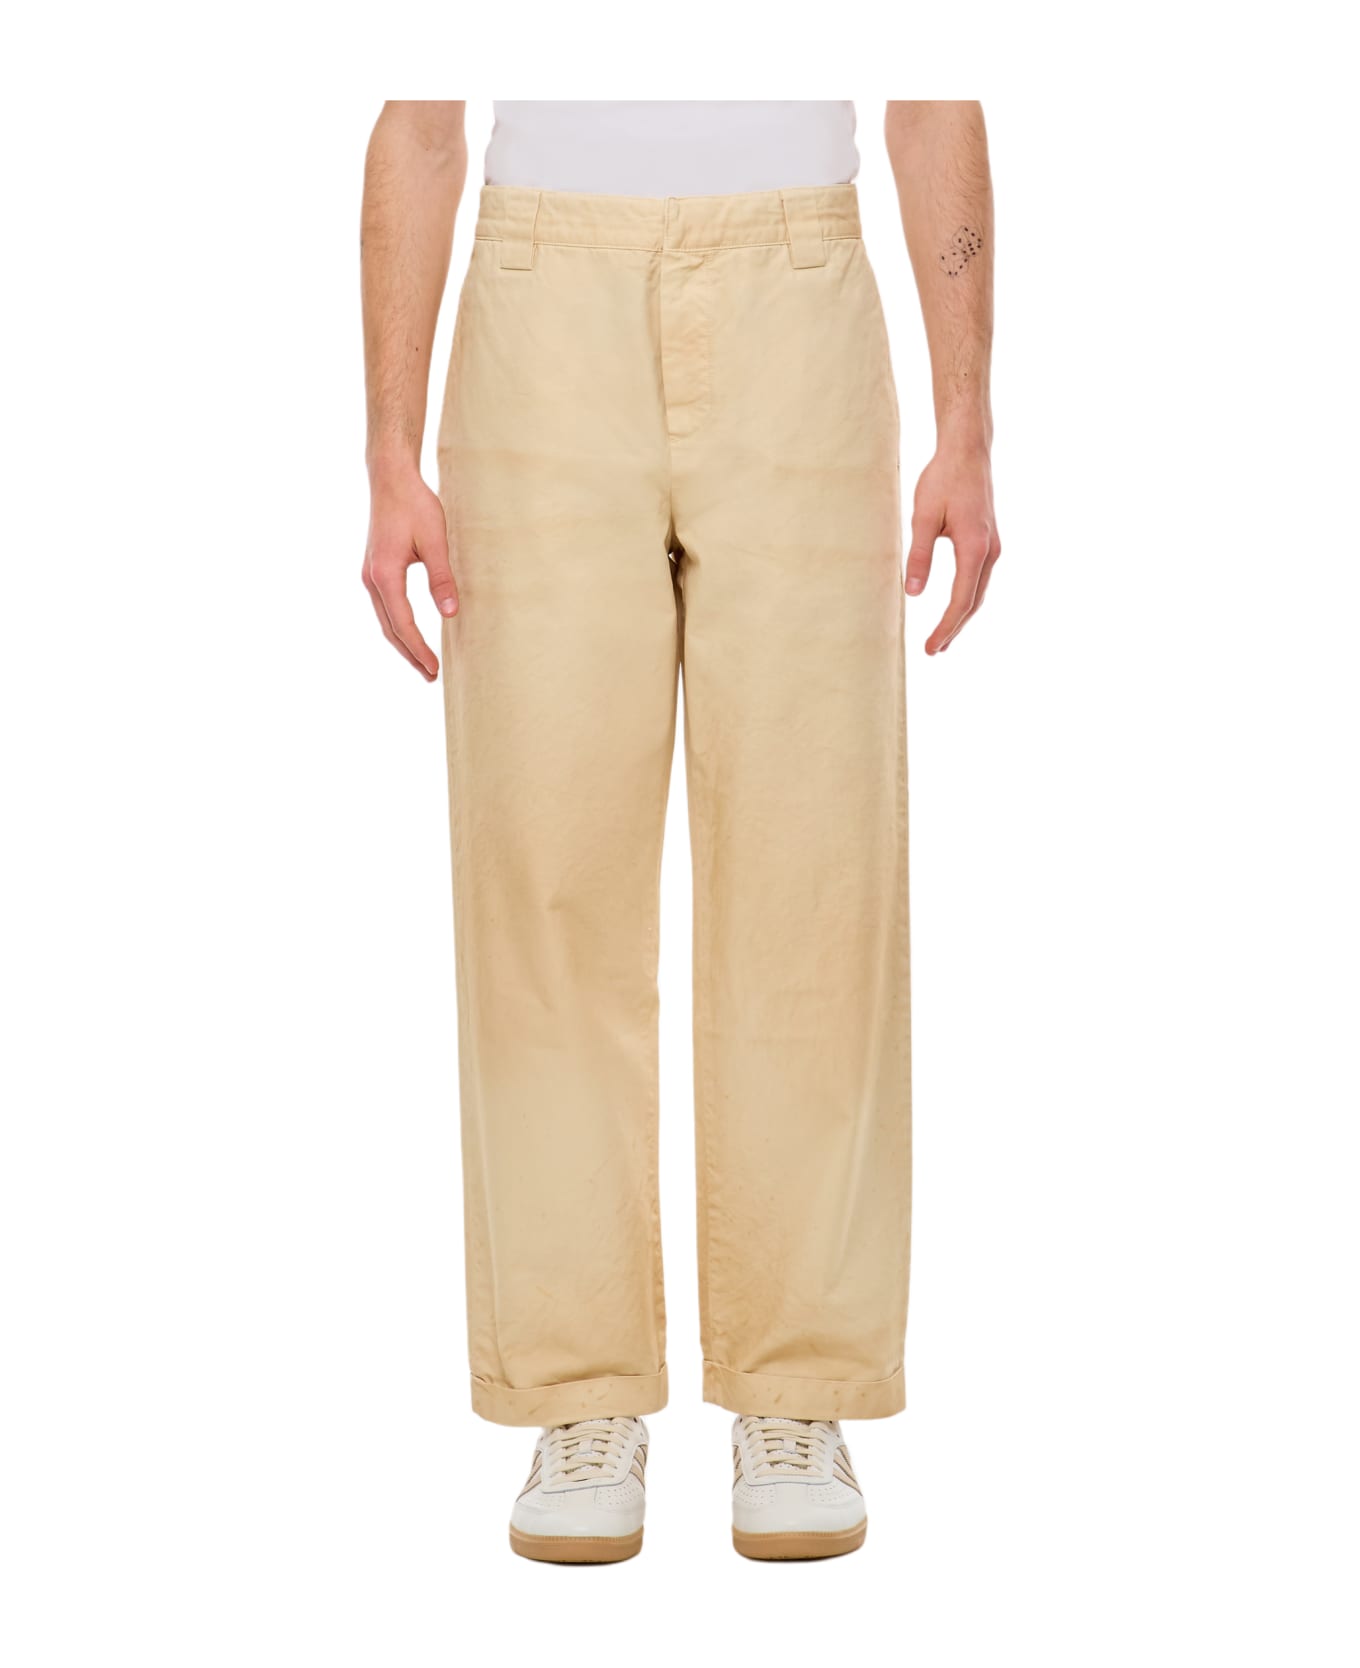 Golden Goose Cotton Chino Skate Trousers - Beige